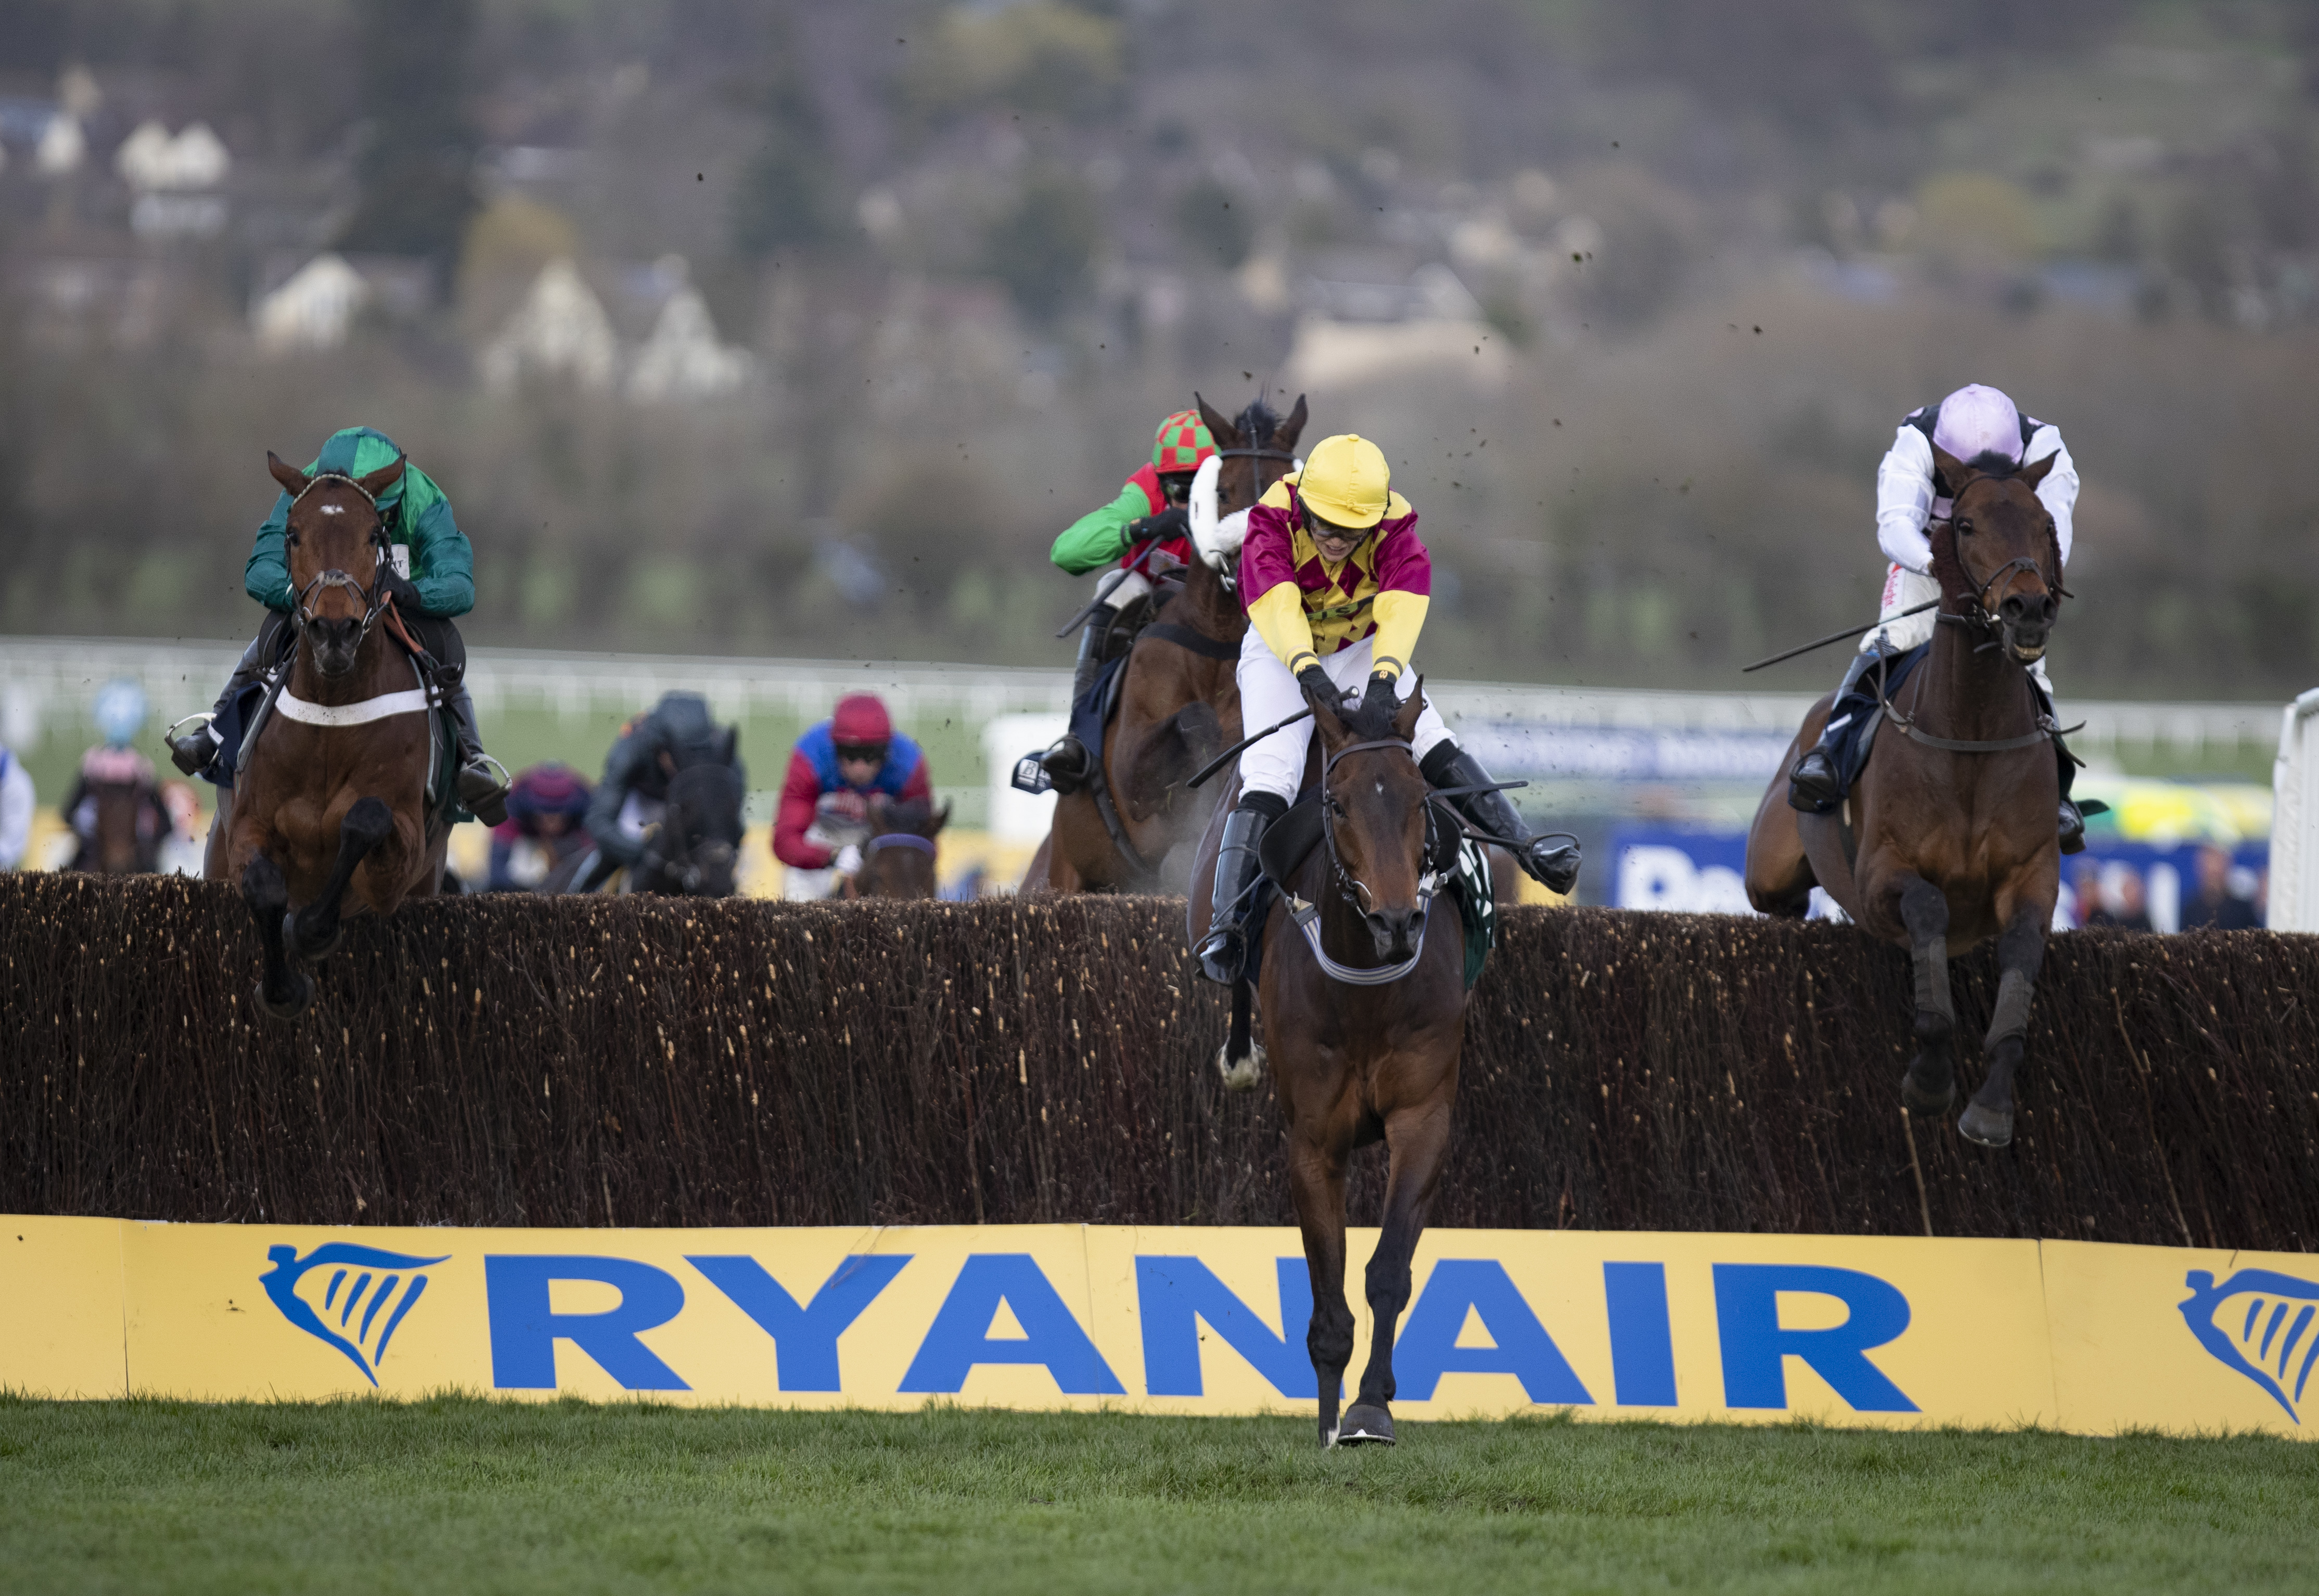 Siruh Du Lac and Lizzie Kelly winning the Brown Advisory and Merriebelle Stable Plate Handicap Chase at the Cheltenham Festival 2019